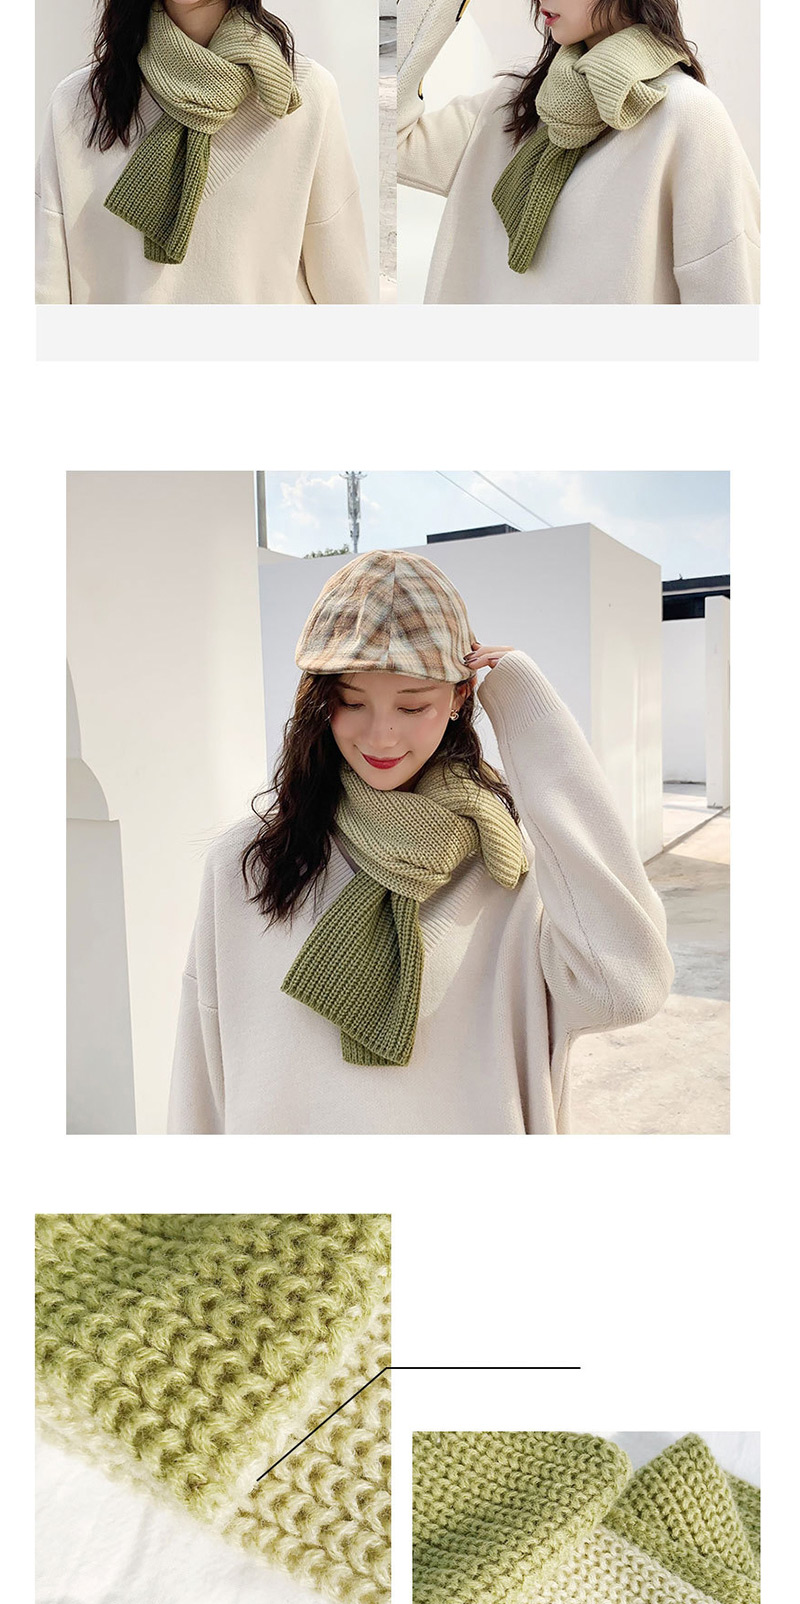 Fashion Two-color Stitching Caramel + Dark Gray Stitched Two-tone Knit Short Scarf,knitting Wool Scaves